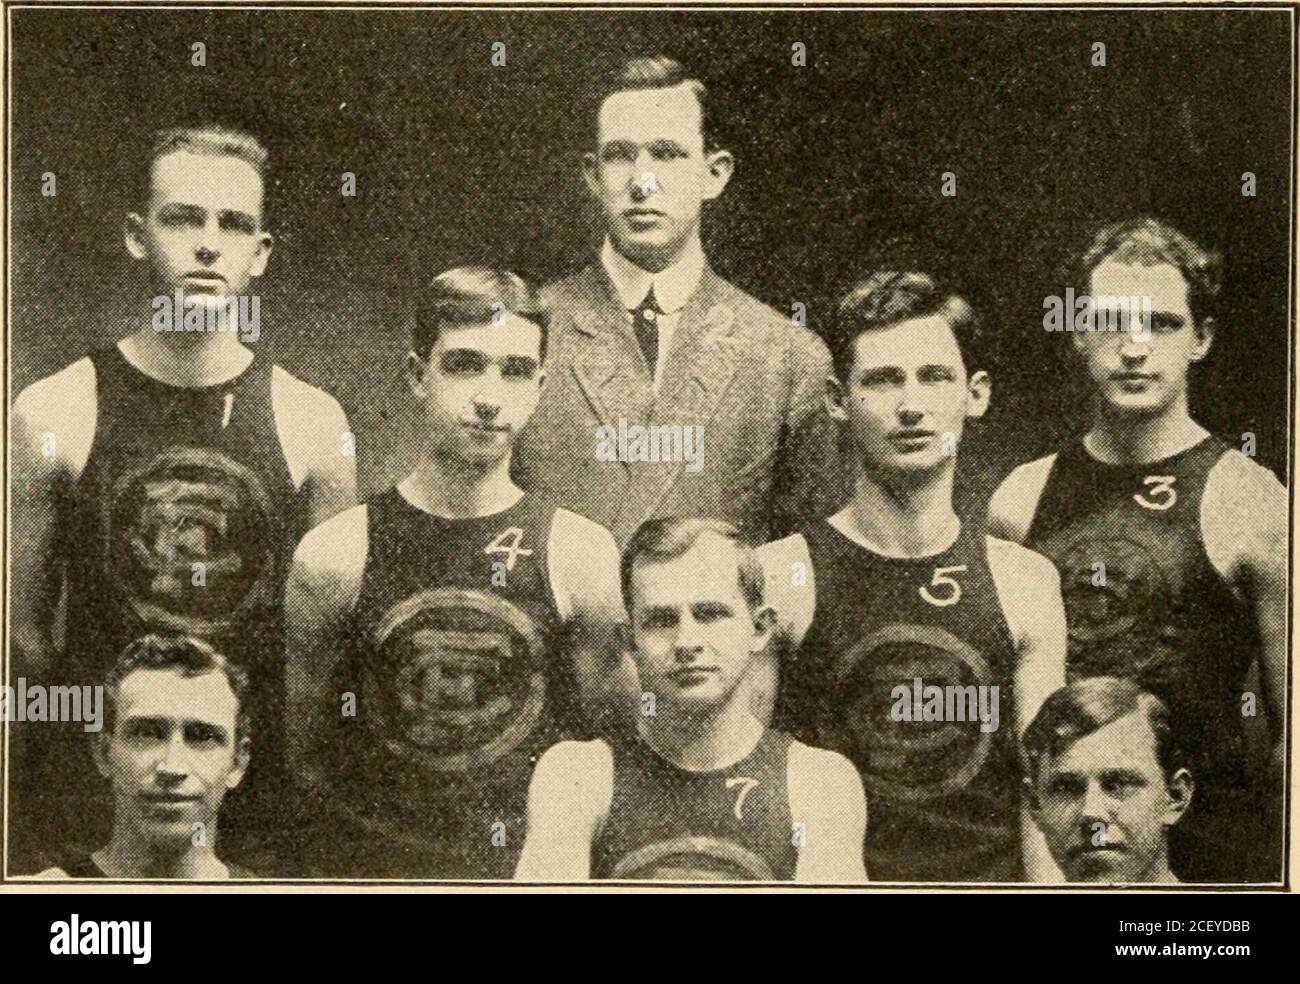 . Spalding's official collegiate basket ball guide. 1, W. Livingstoo, Coach; 2. Prouty: 3, Holt; 4, H. Martin, Mgr.; 5, Rupp;6, P. Morrow. Capt.; 7. Cbaille; 8. McCann; 9, Haskins. DENISON UNIVERSITY TEAM, GRANVILLE, OHIO.. 1. Smith; 2, Stoner. Mgr.: 3, P.ohney; 4, MeCall; 5, F. Barnhart; 6, H.Banibart; 7, Ulrlch, Capt.; S, Harvitt. FINDLAY rOHIO^ COLLEGE TEAM. SPALDINGS ATHLETIC LIBRARY. Ill 1901-02—Columbia,1903-04—Columbia, Columbia,1904-05—Columbia, Columbia,1905-06—Columbia, Columbia,1906-07—Columbia, Columbia, COLUMBIA 25; Penna., 1617; Penna., 1523; Penna., 1227; Penna., 1756; Penna., 1 Stock Photo